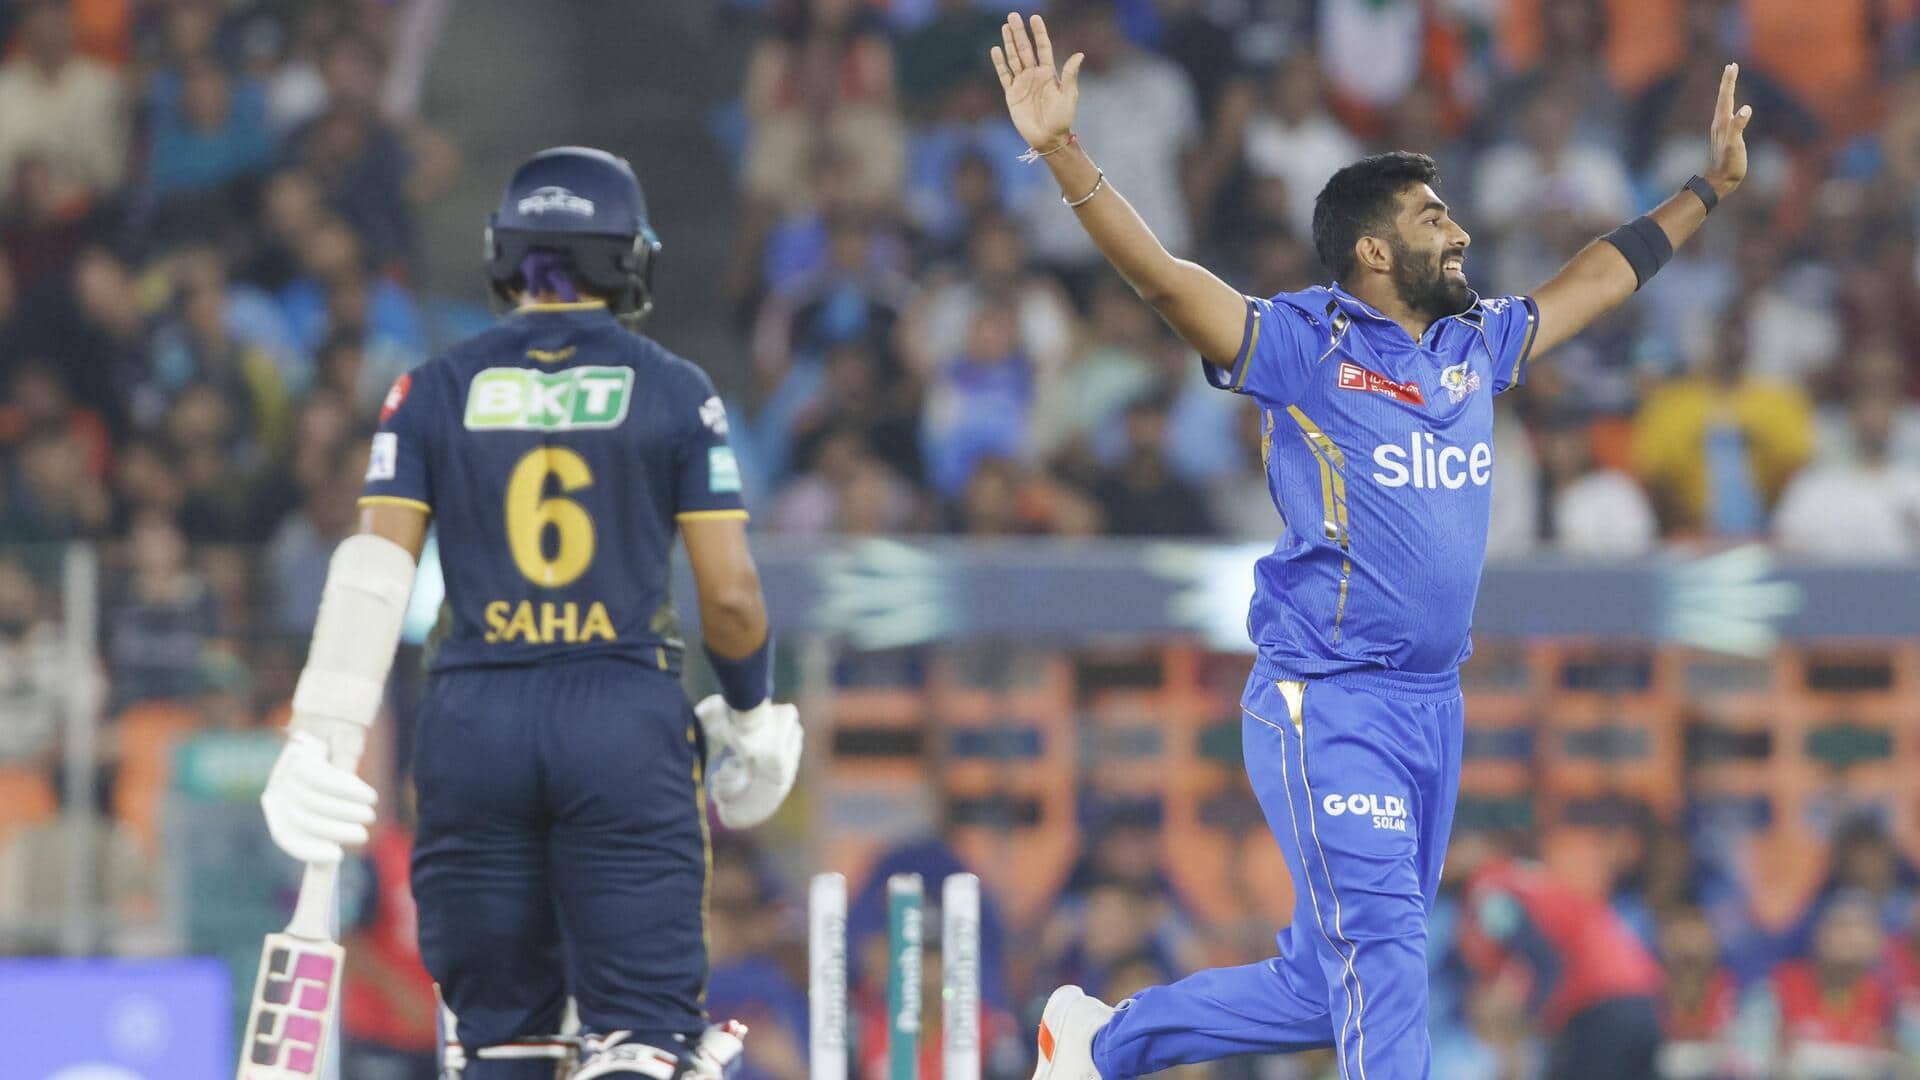 Jasprit Bumrah completes 150 T20 wickets for Mumbai Indians: Stats